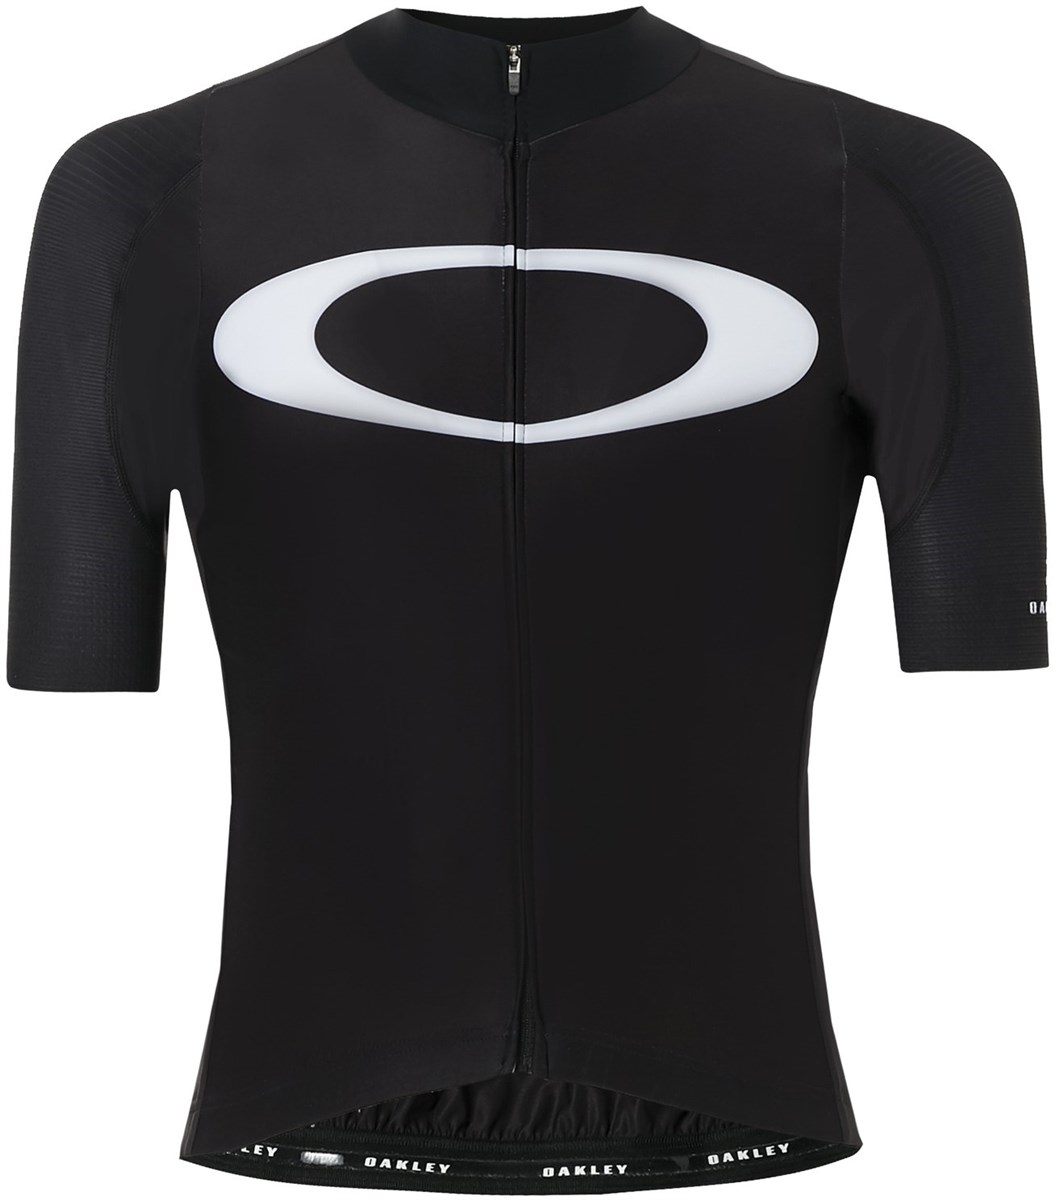 Oakley Premium Branded Road Jersey product image